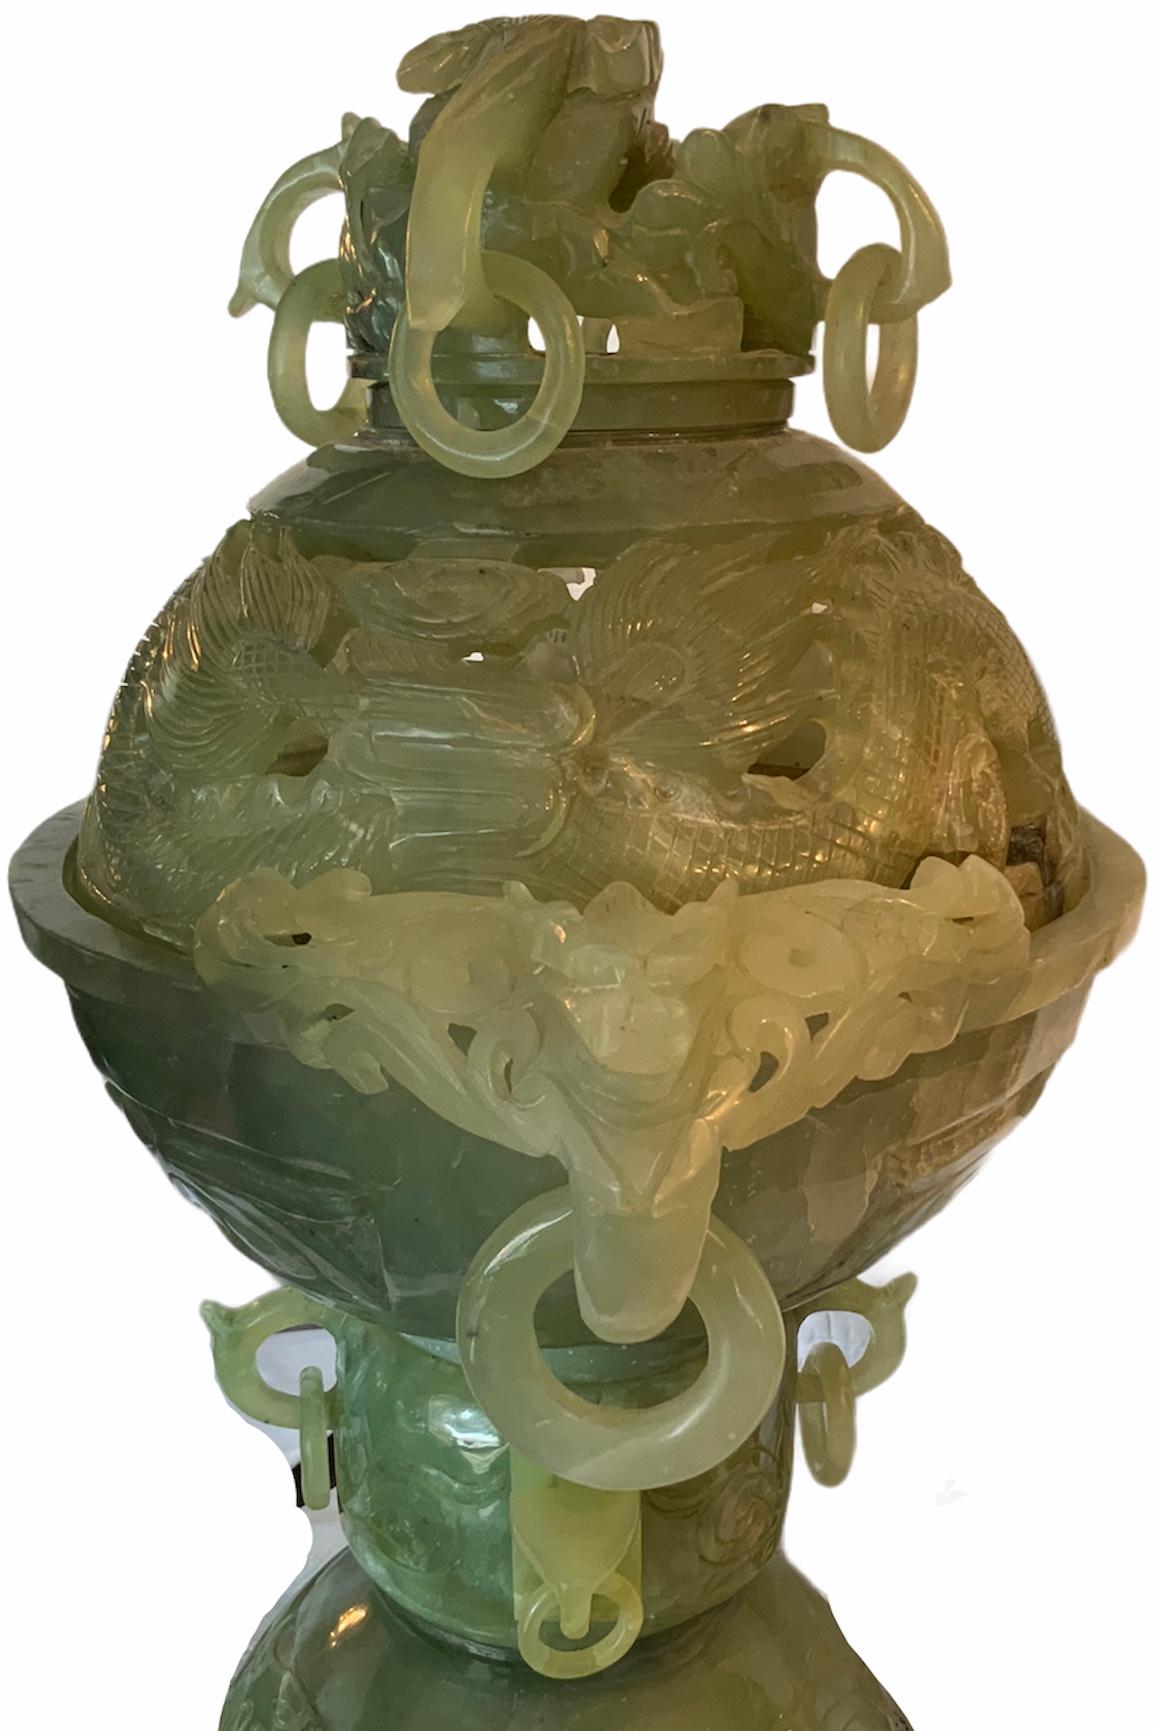 An exceptional chinese jade like stone  large heavy incense burner. The jade like stone depicts different shades of green and that is what made this piece more rare. It is built in three pieces: the crown lid, the bowl and the pedestal. All of them